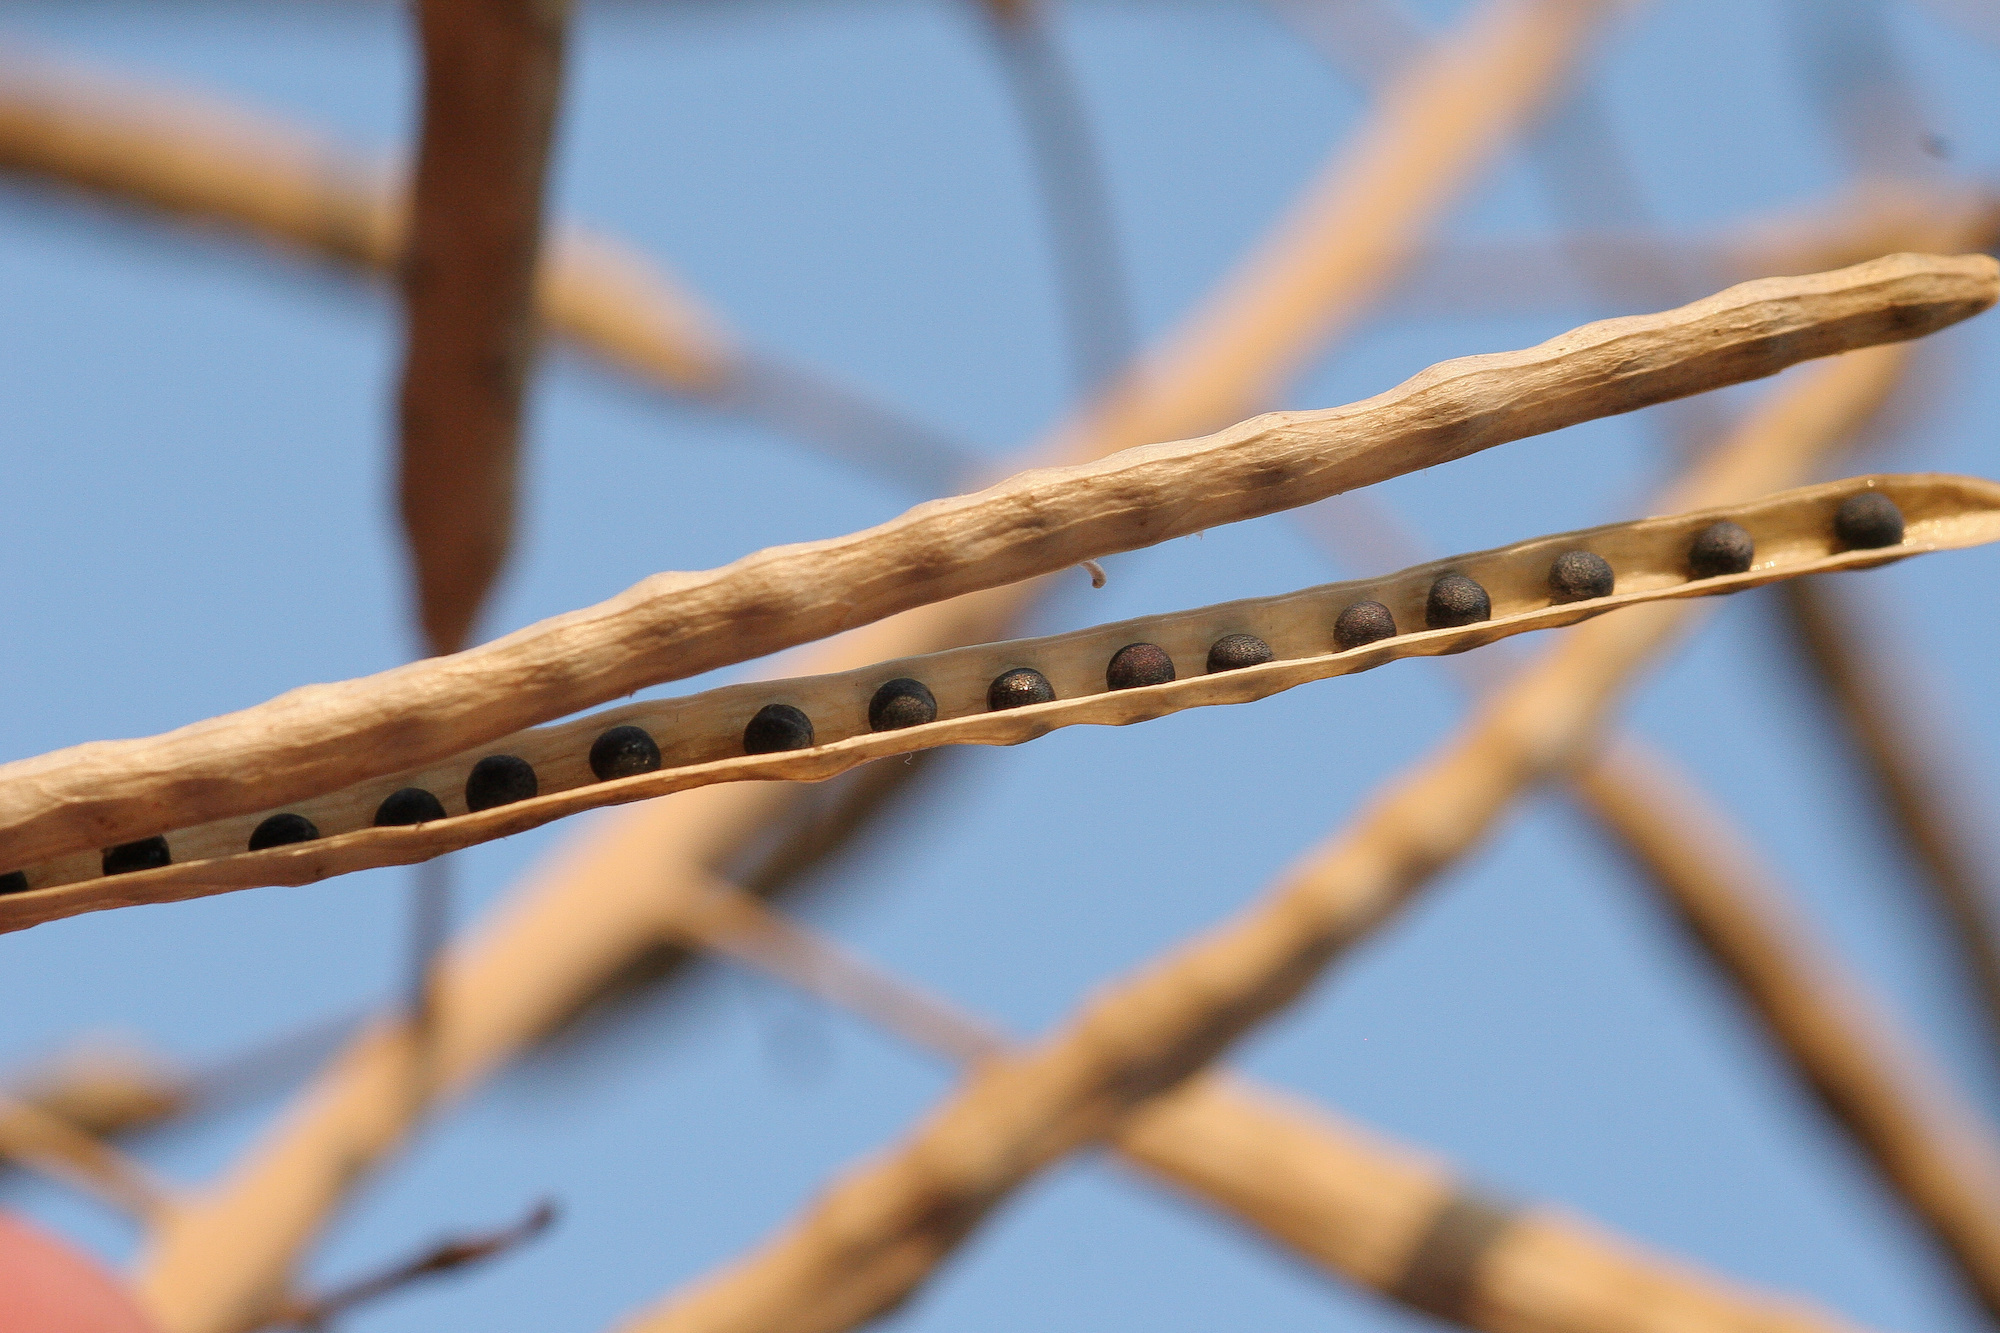 Firmer canola pods do not burst prematurely and increase farmers' yields. (Image: Adobe Stock)